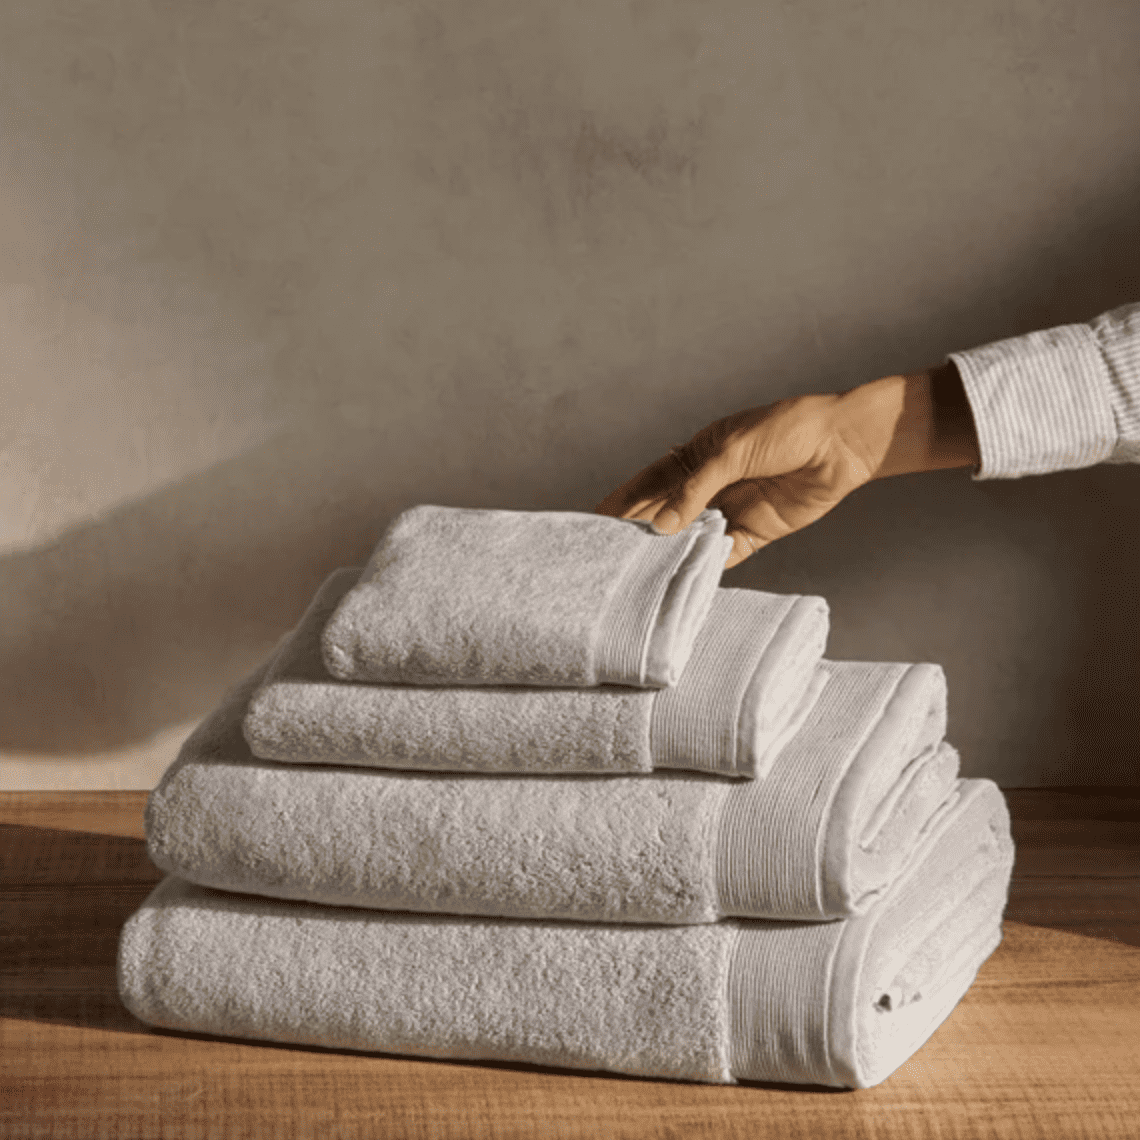 Onsen Bath Towels Review: Soft, Quick-Drying, and Worth It – SPY